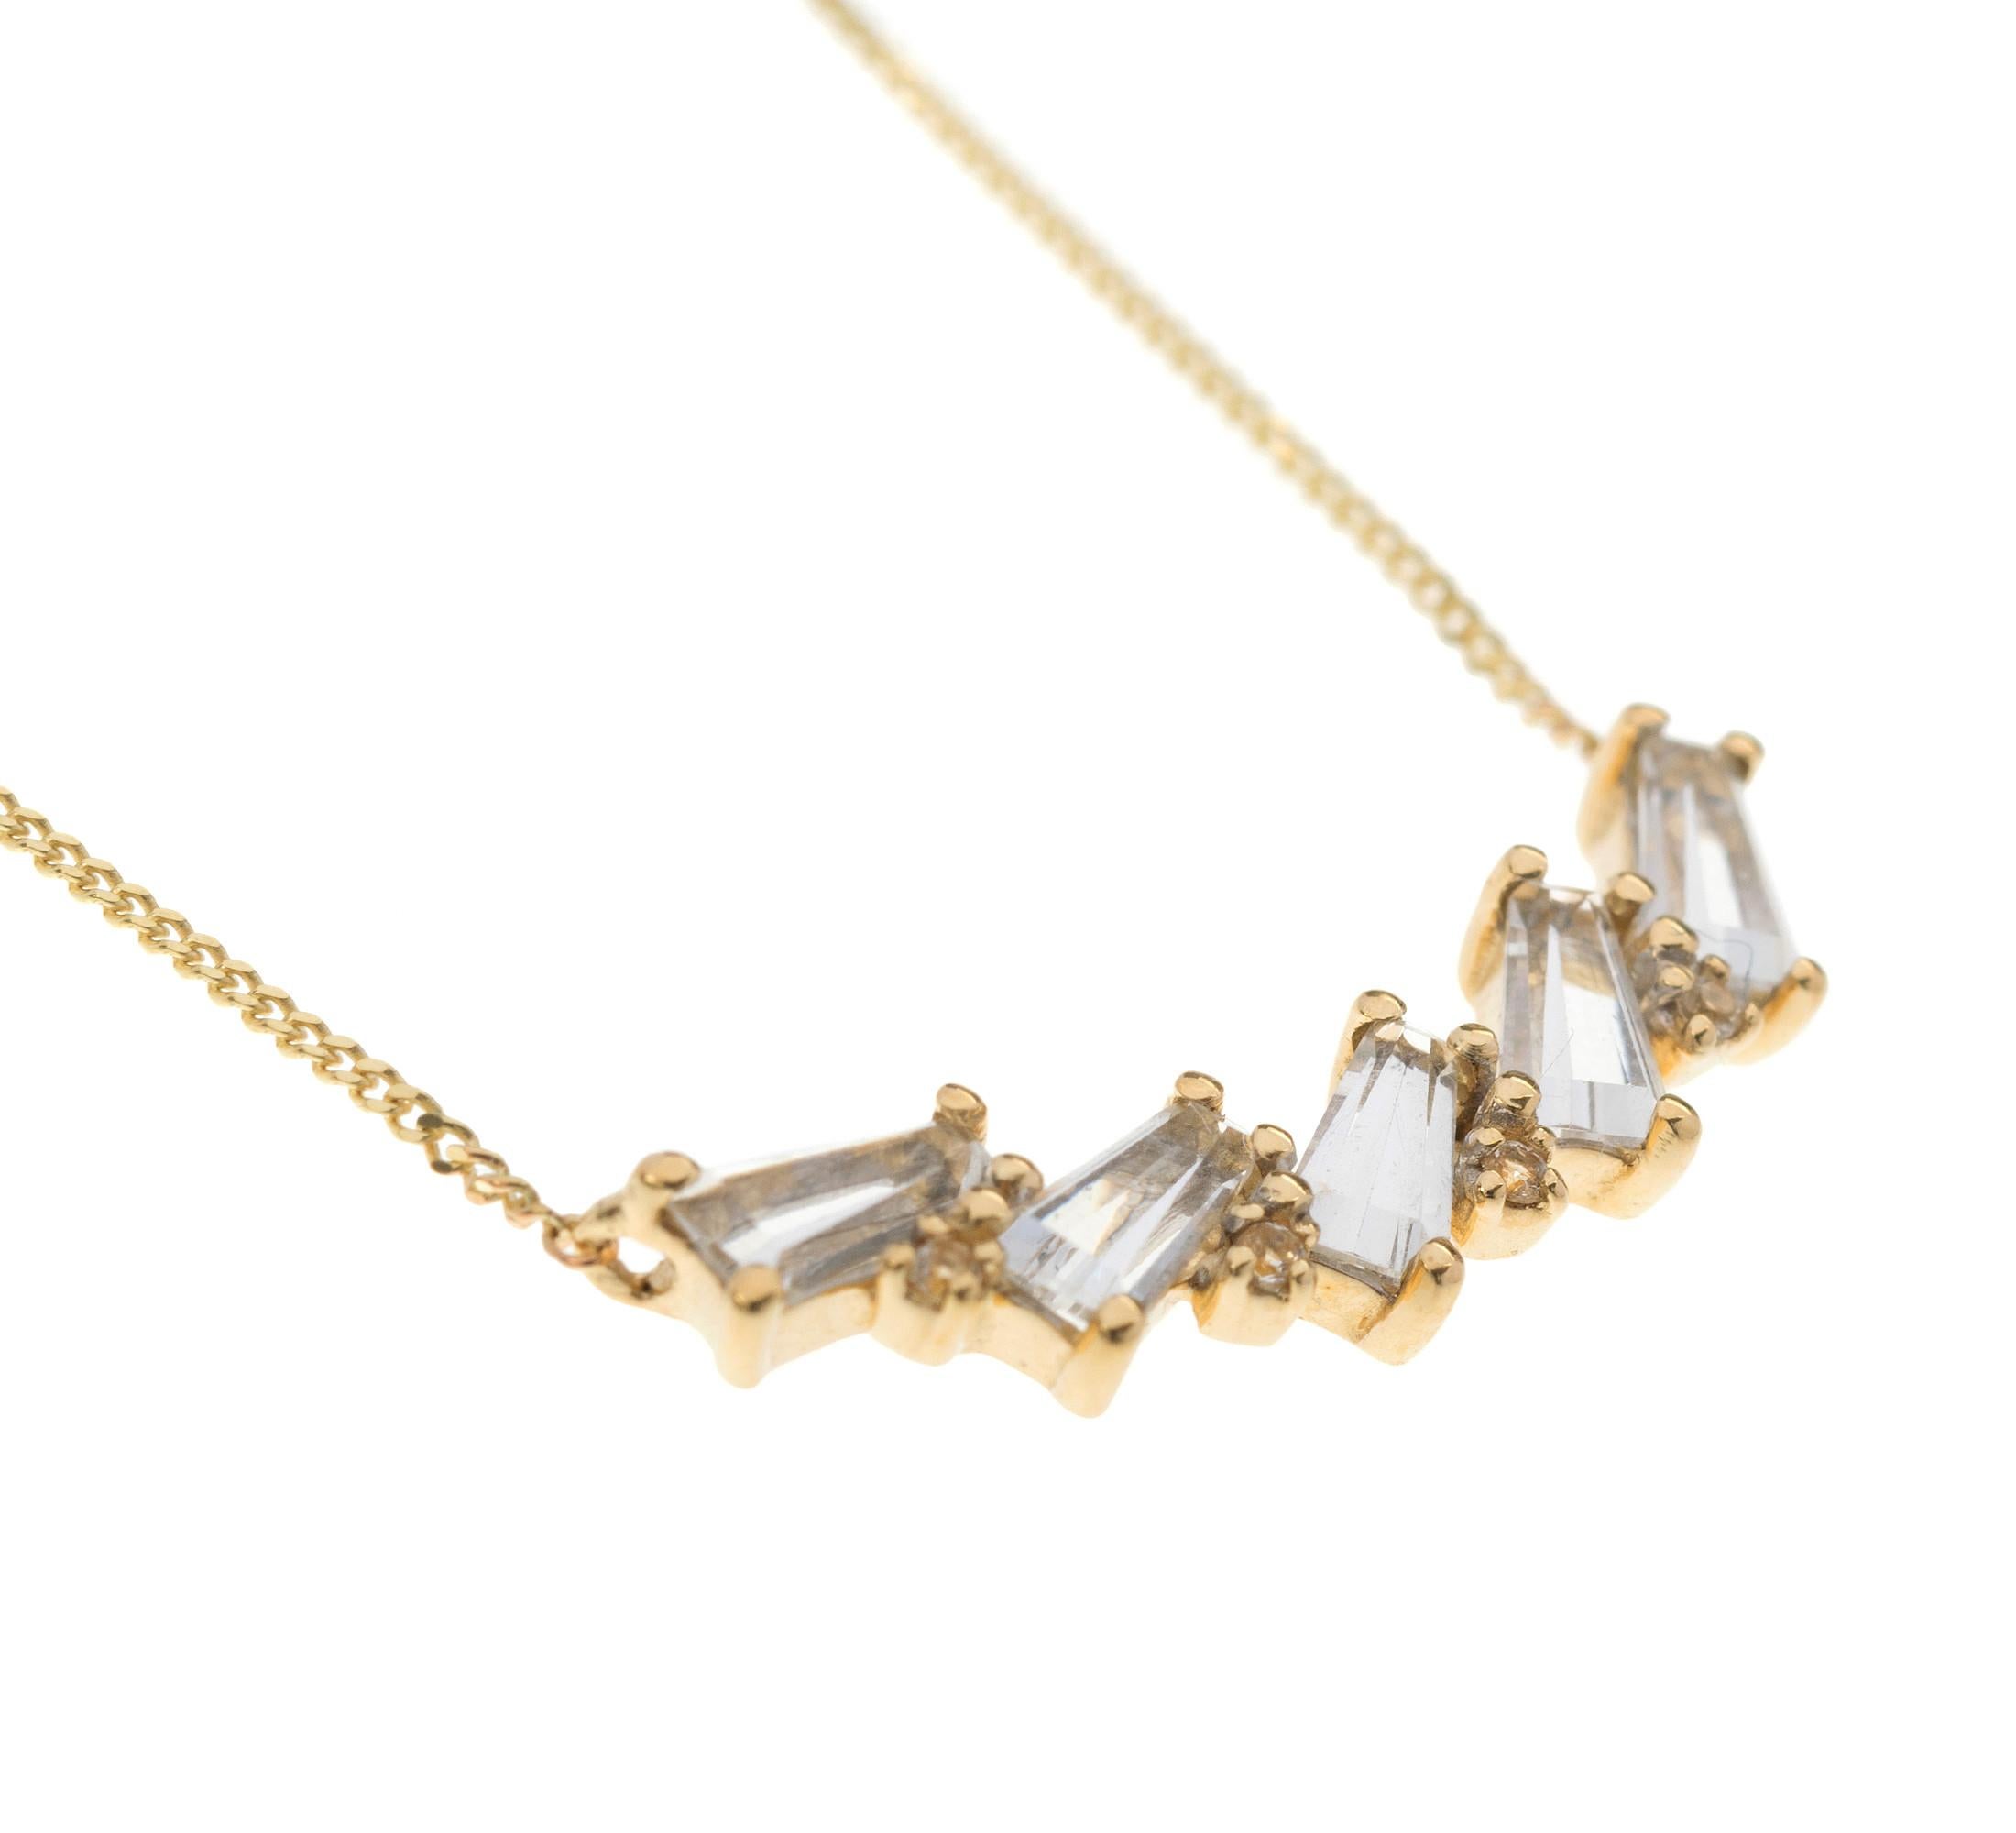 A scintilating geometric designed necklace set with round and tapered baguette cut shimmering colourless Topaz all framed in 9ct yellow gold. The adjustable chain allows choice in length and style. A versatile and popular choice for desk til dusk